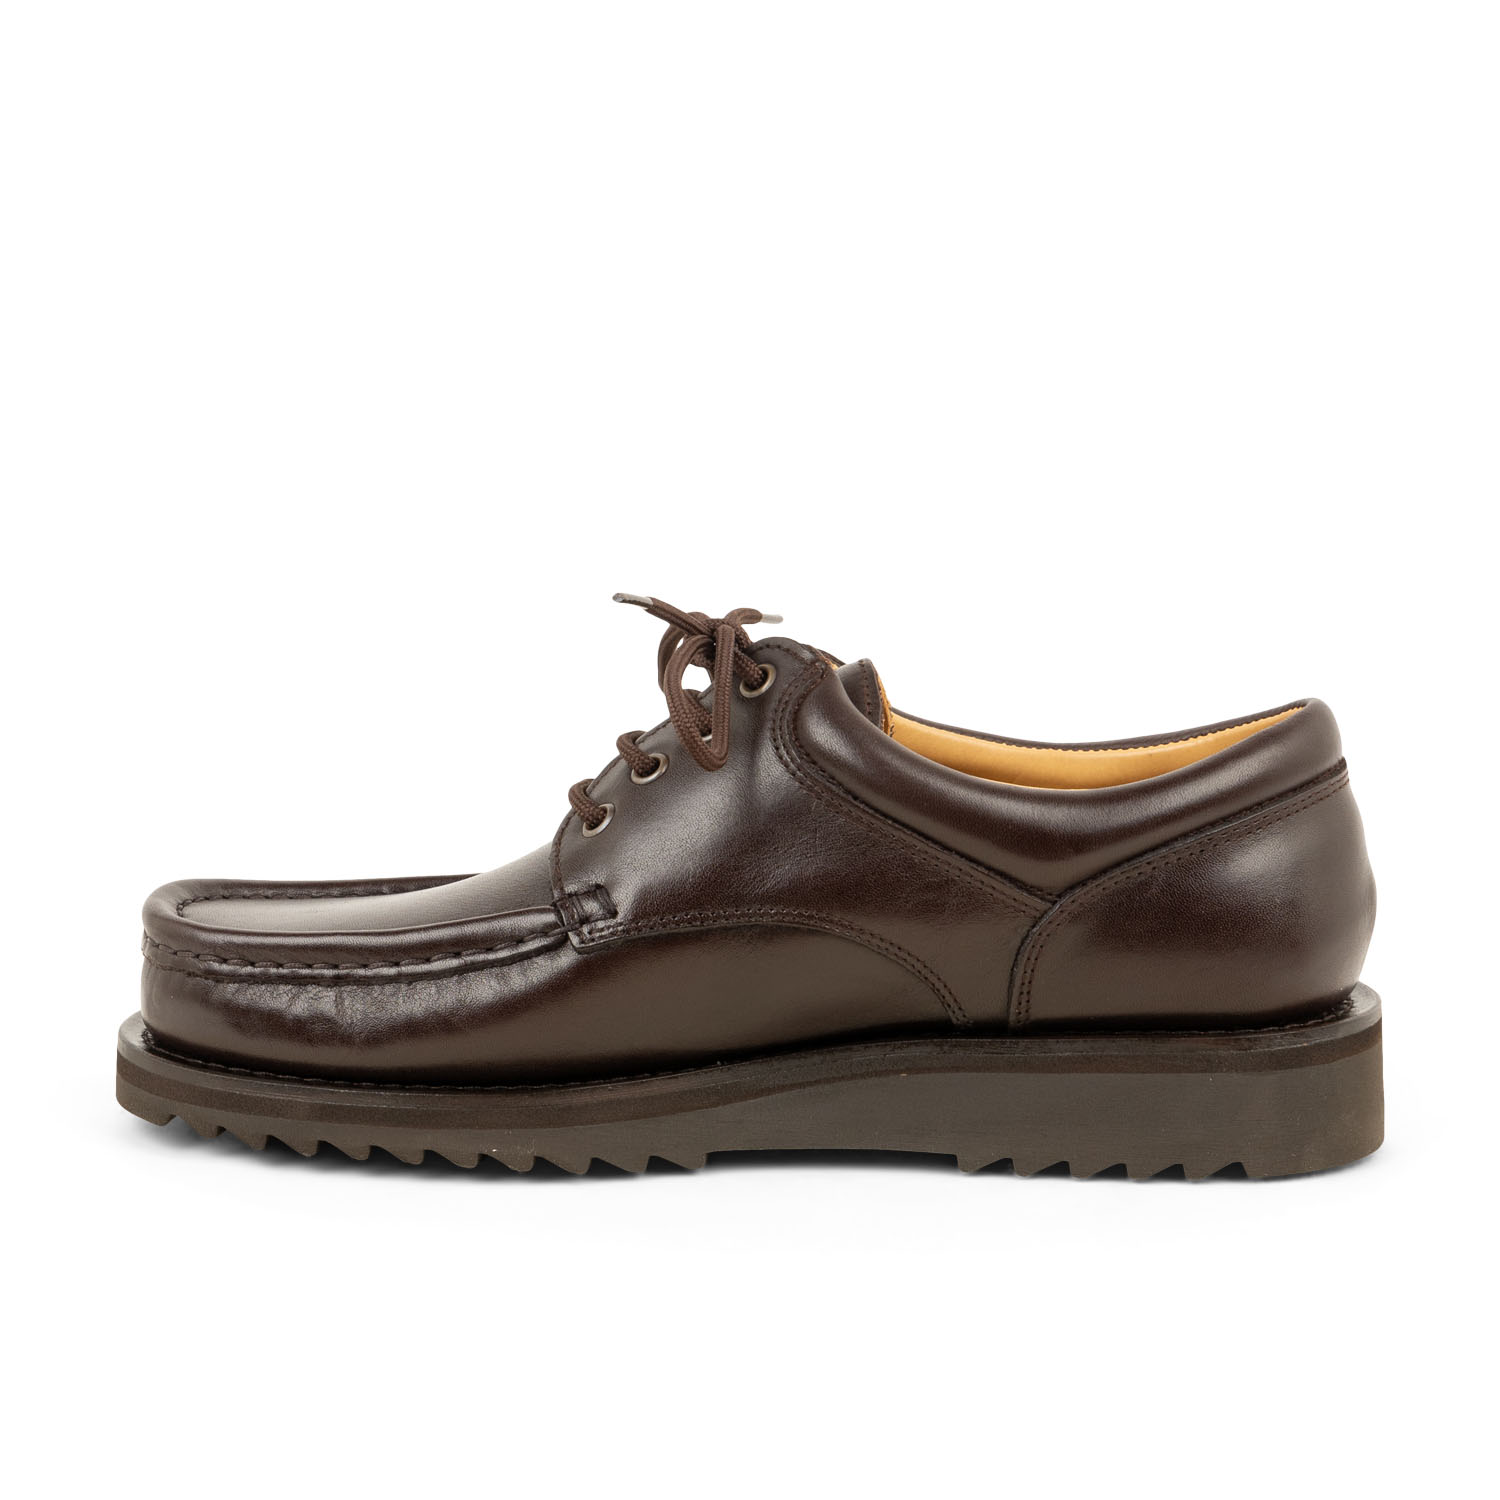 04 - THIERS - PARABOOT - Chaussures à lacets - Cuir